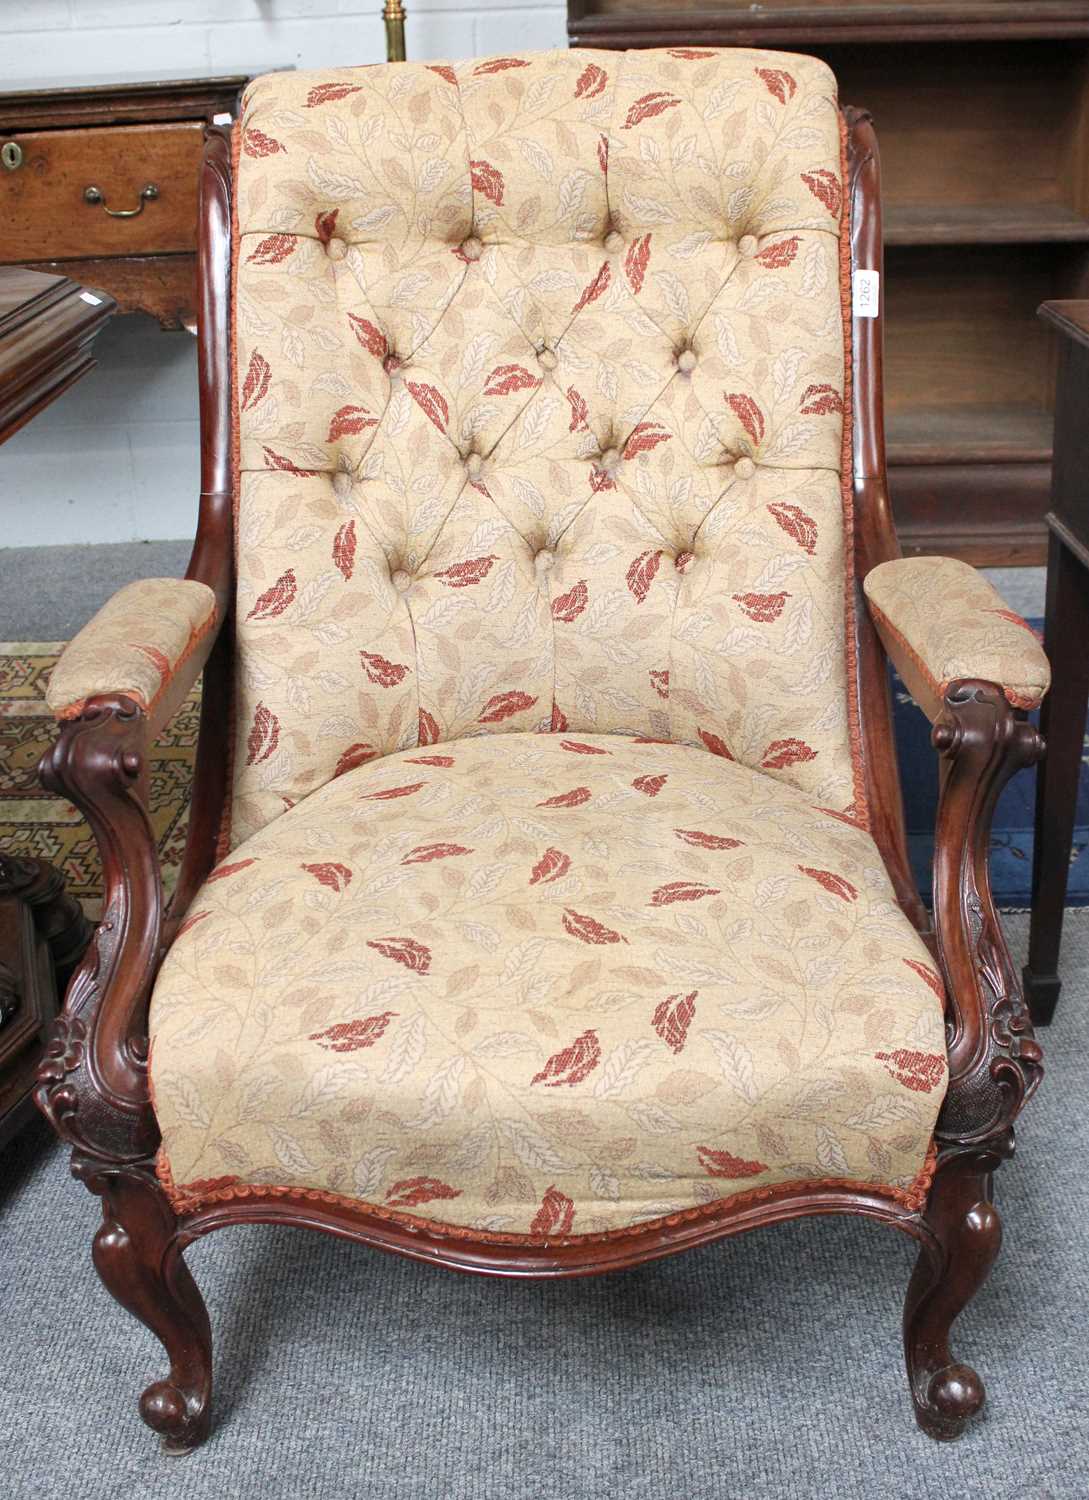 A Victorian Carved Mahogany Part Upholstered Chair, with buttoned back - Image 2 of 2